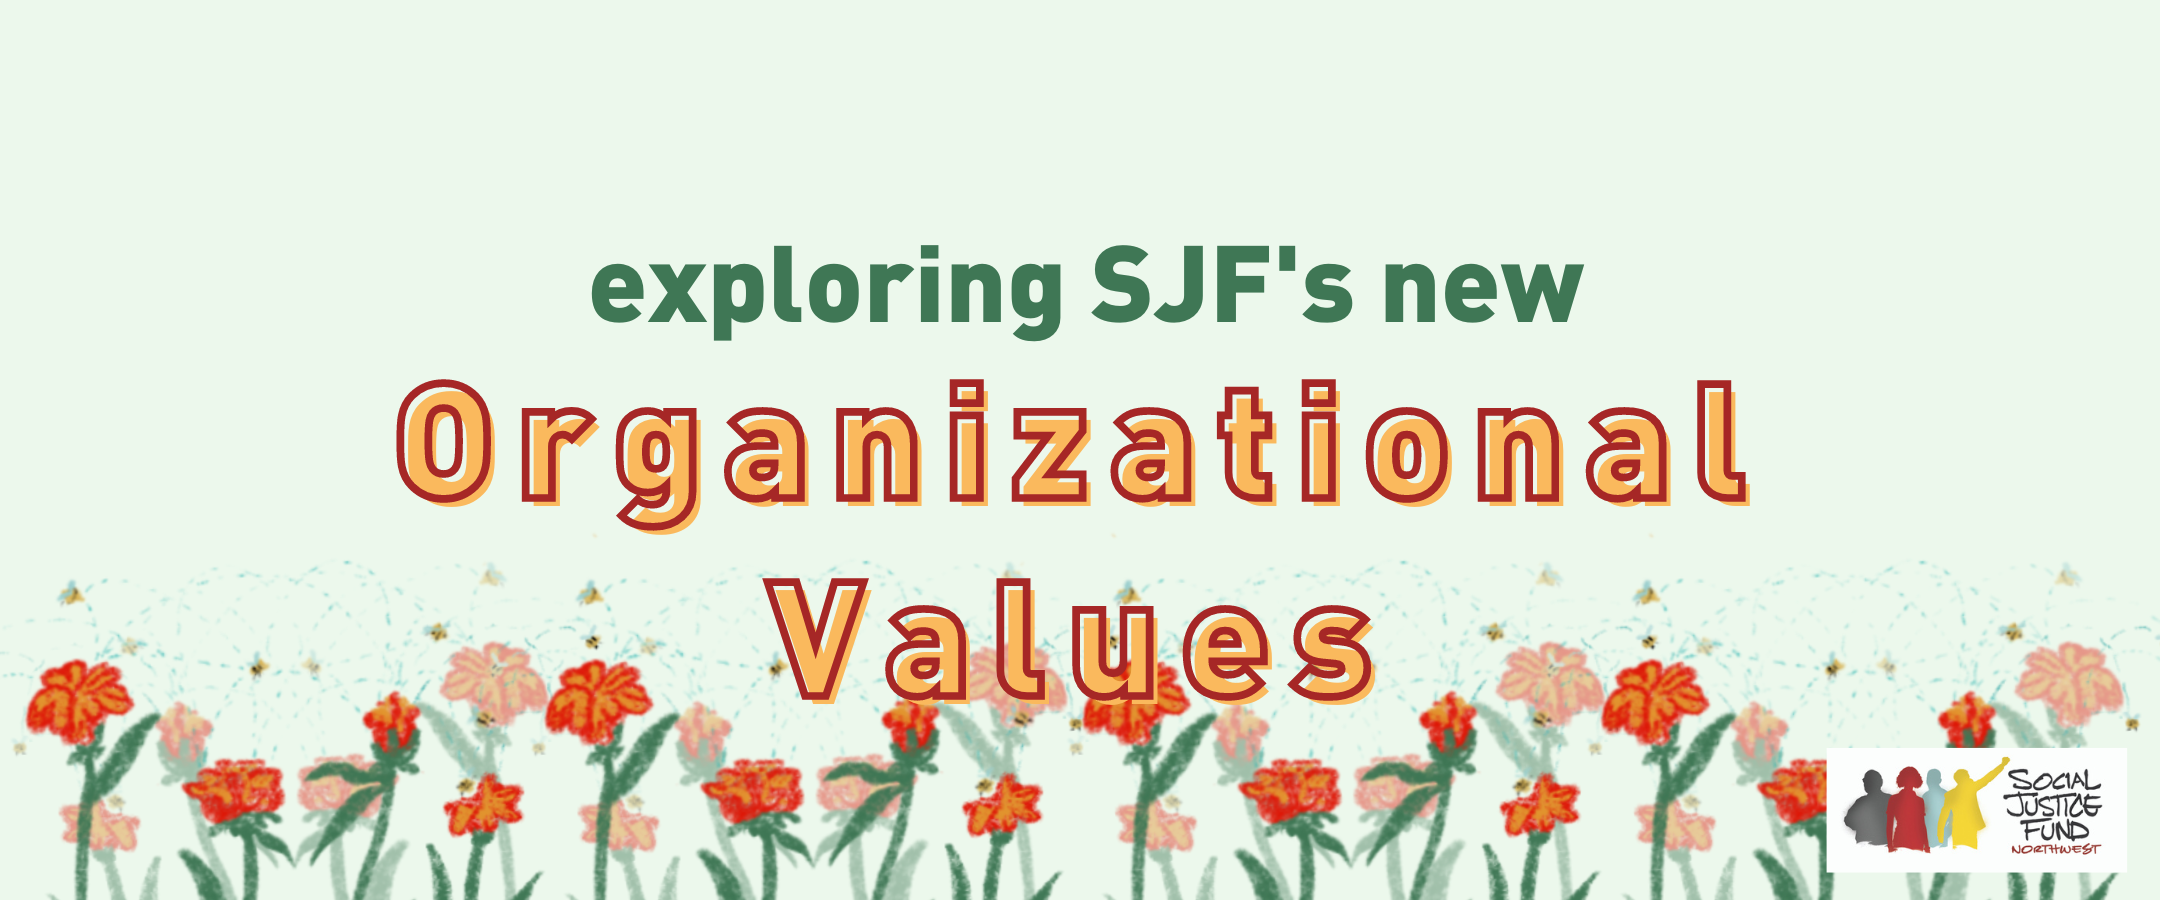 Rectangular banner with light green background and illustration of blooming red flowers and bees across the bottom. Text reads Exploring SJFs new Organizational Values